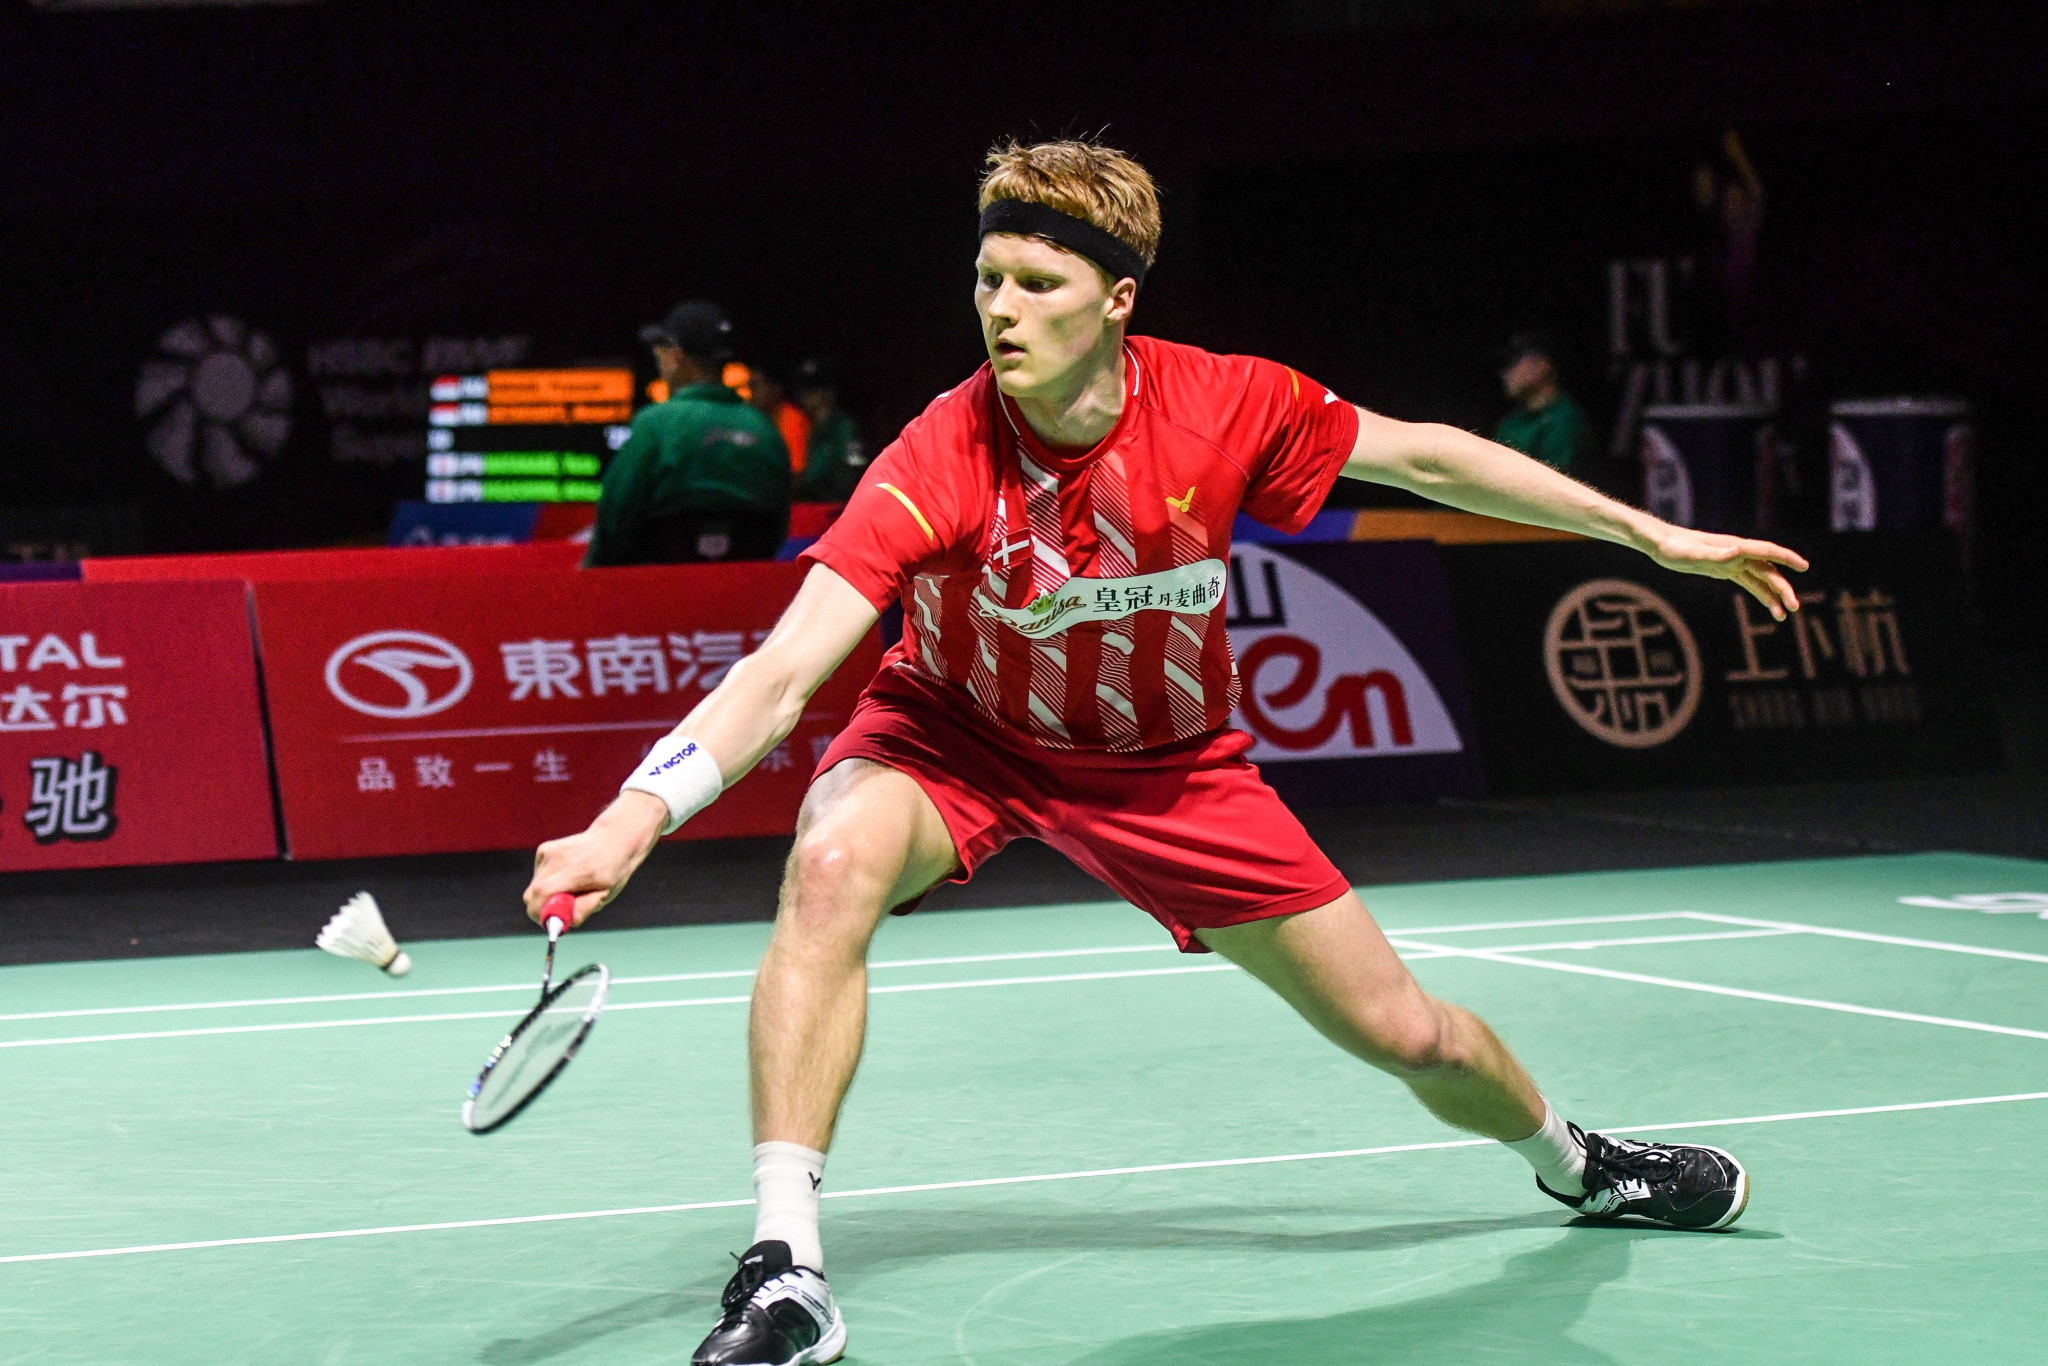 Top seeds all win on day one of European Men's and Women's Badminton Championships